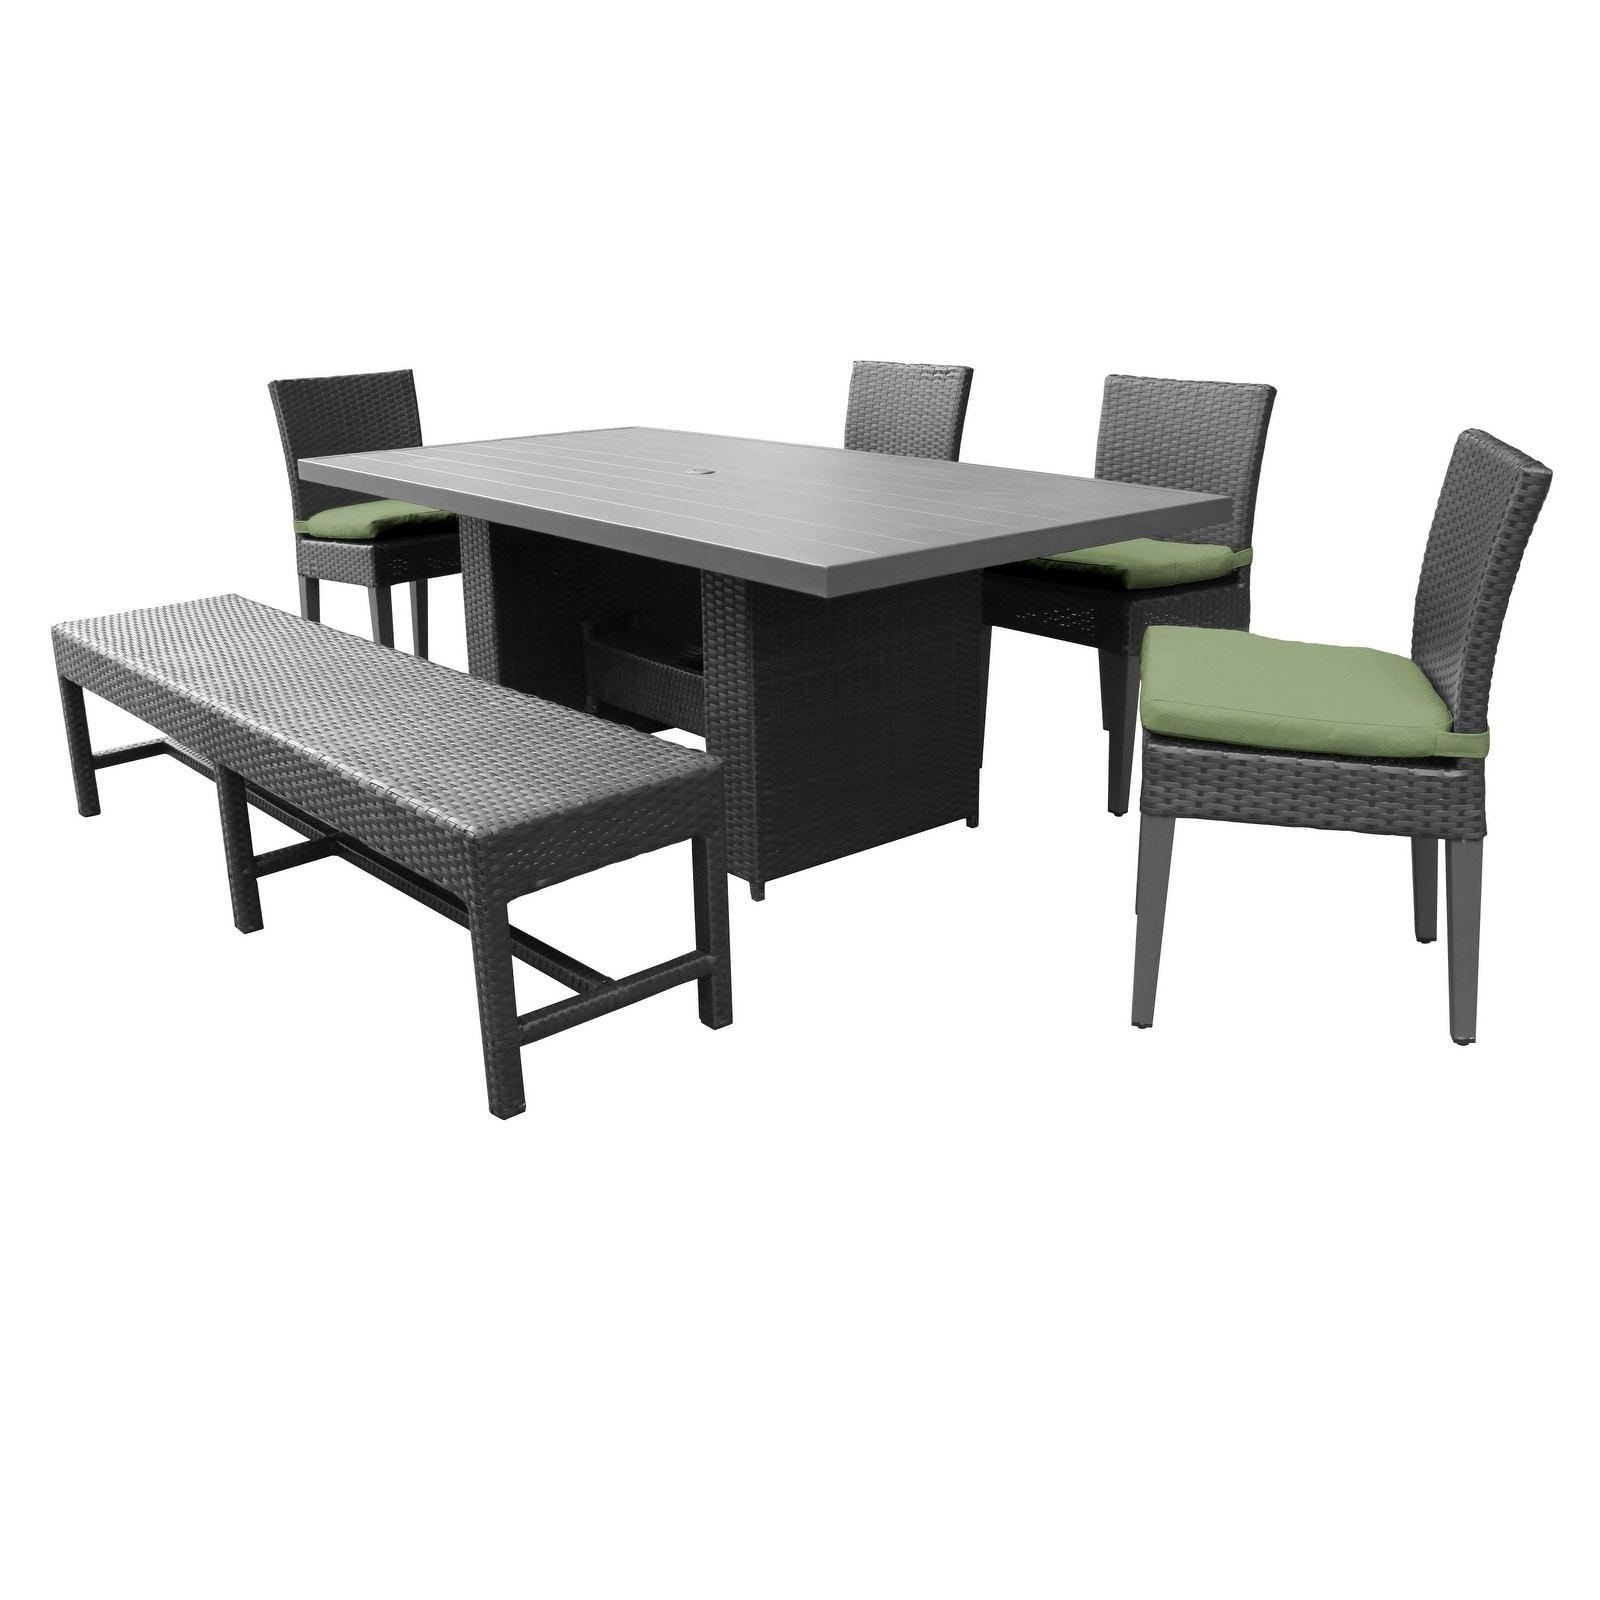 Belle Rectangular Outdoor Patio Dining Table With 4 Chairs And 1 Bench